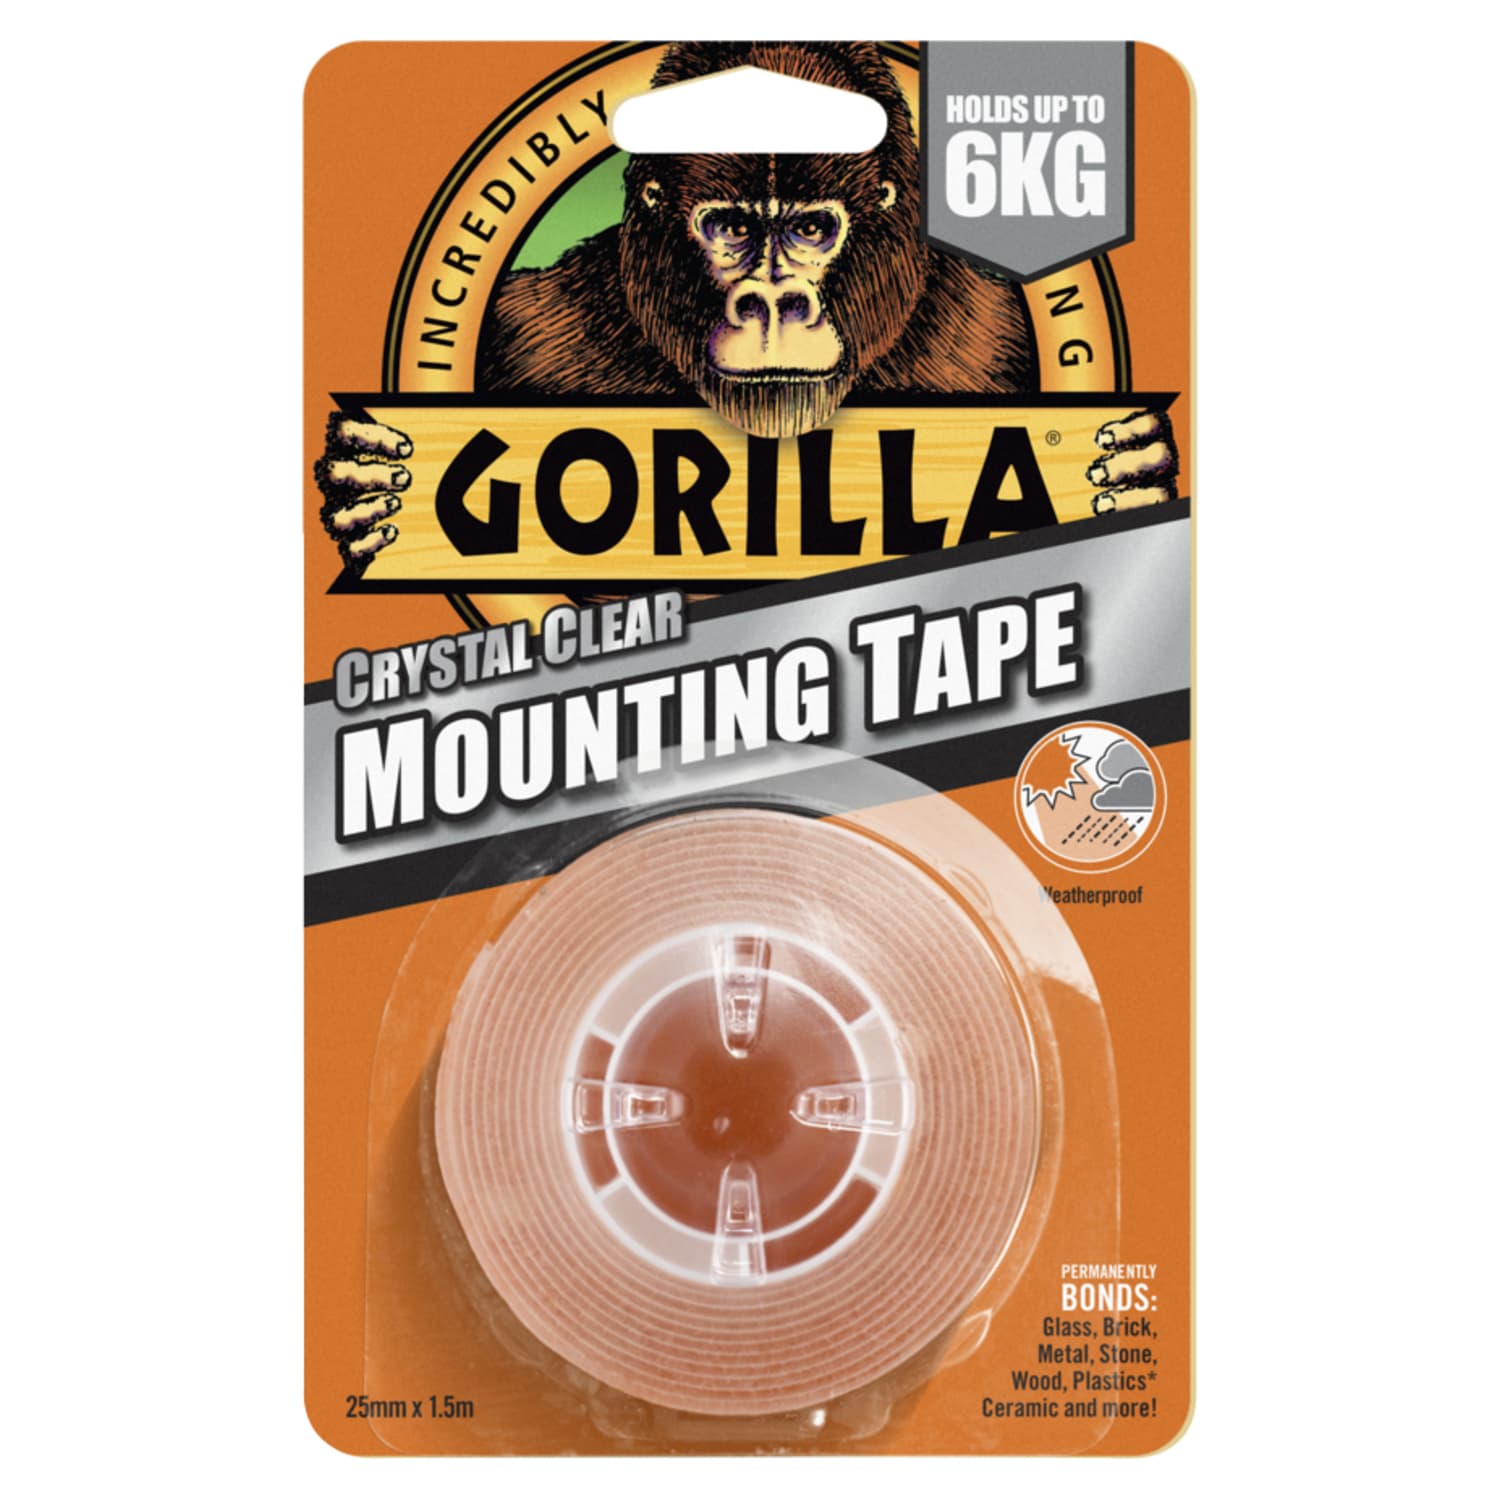 Gorilla Heavy Duty Mounting Tape up to 6kg - 1.5m